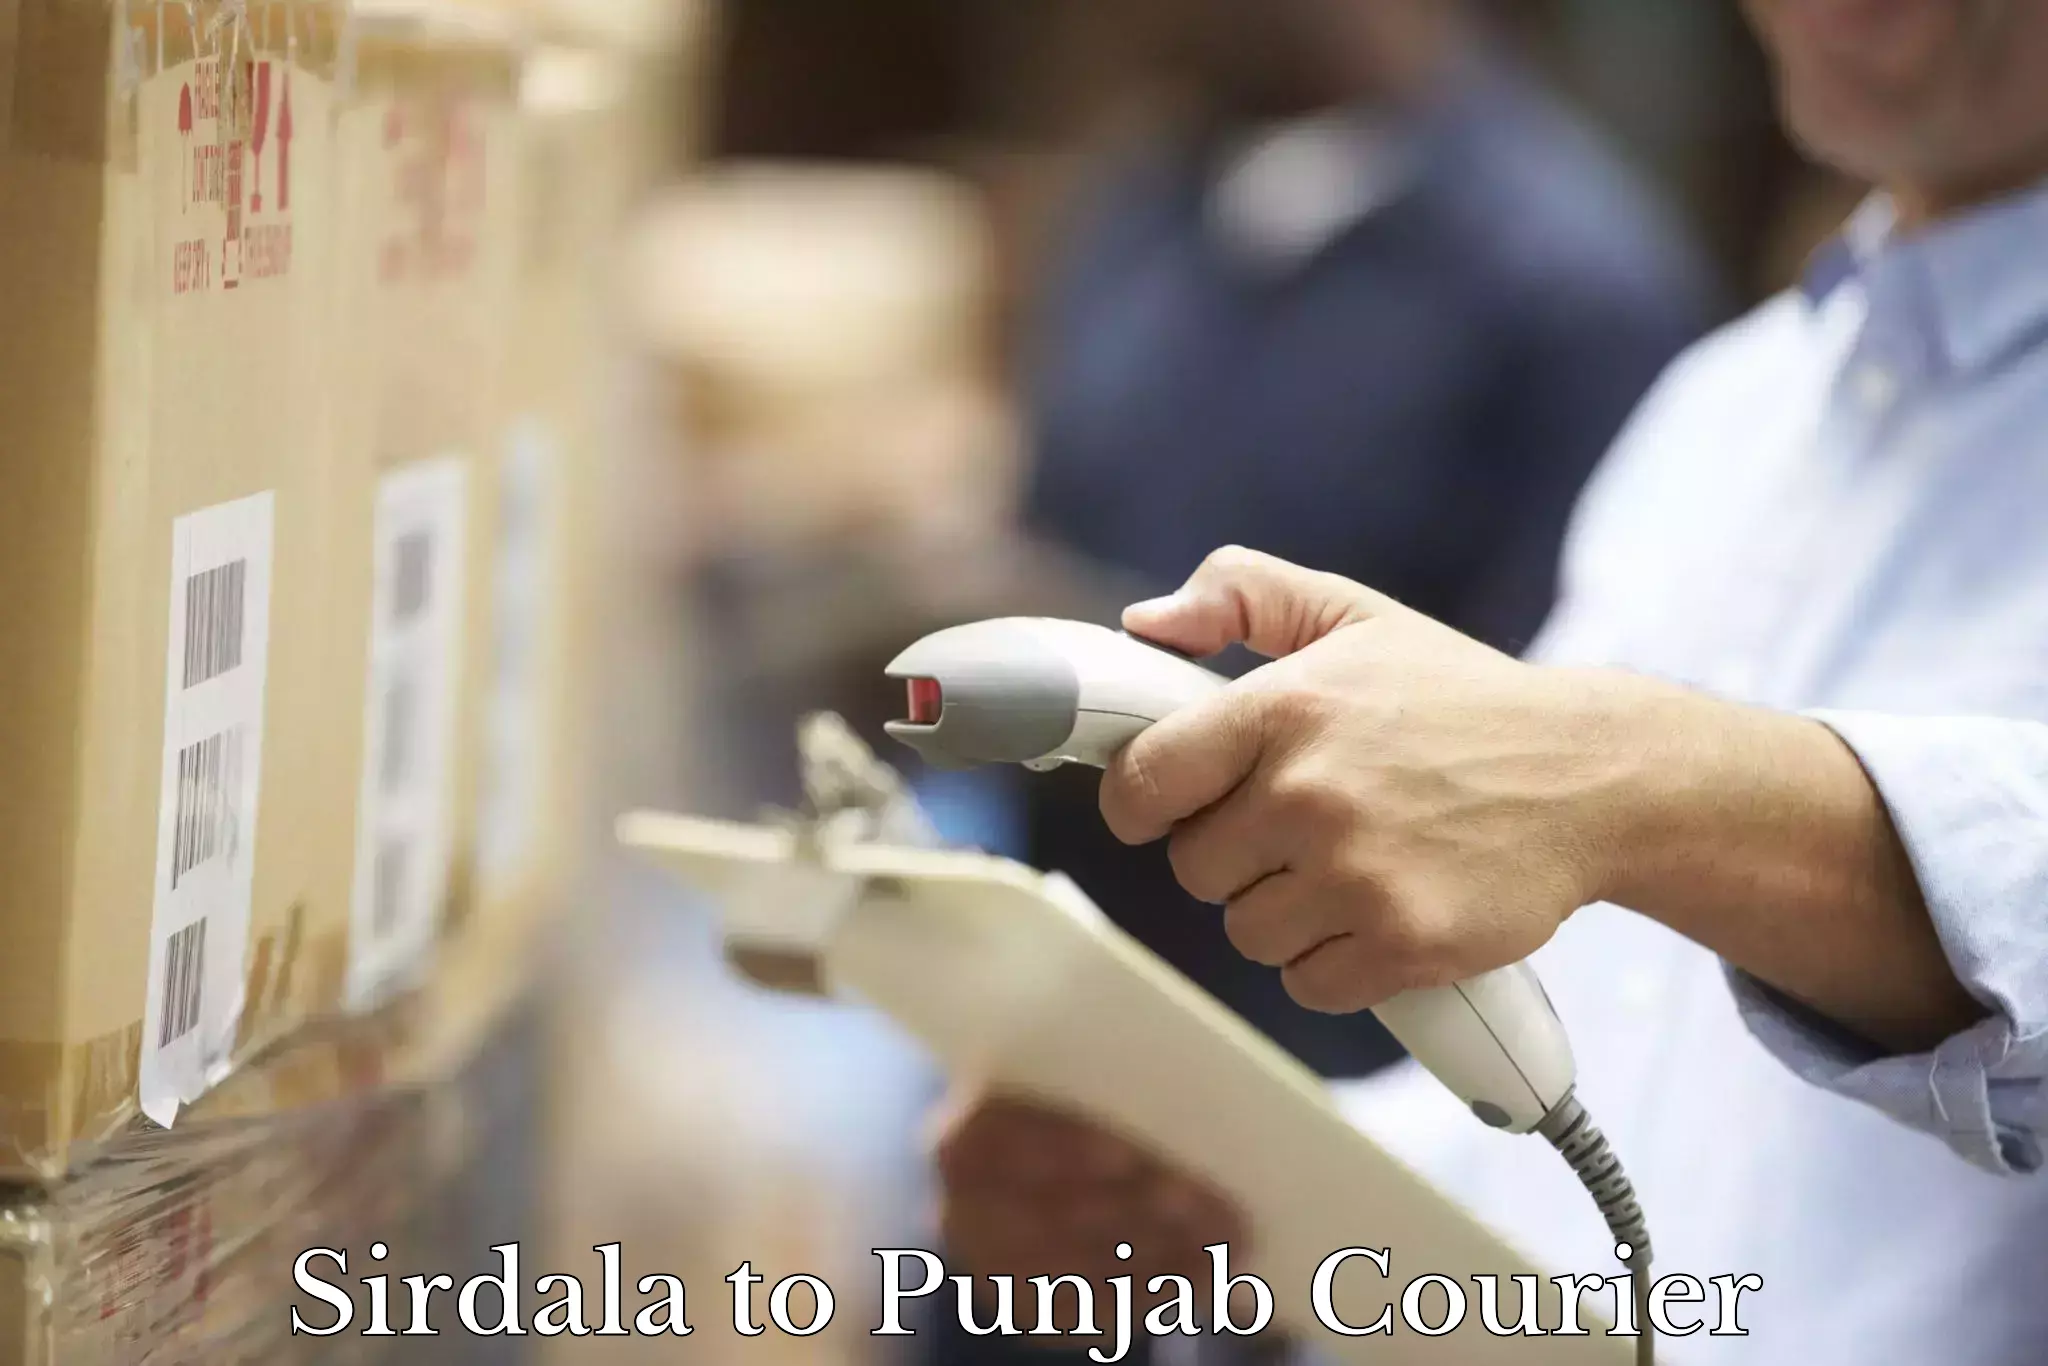 Reliable delivery network Sirdala to Faridkot